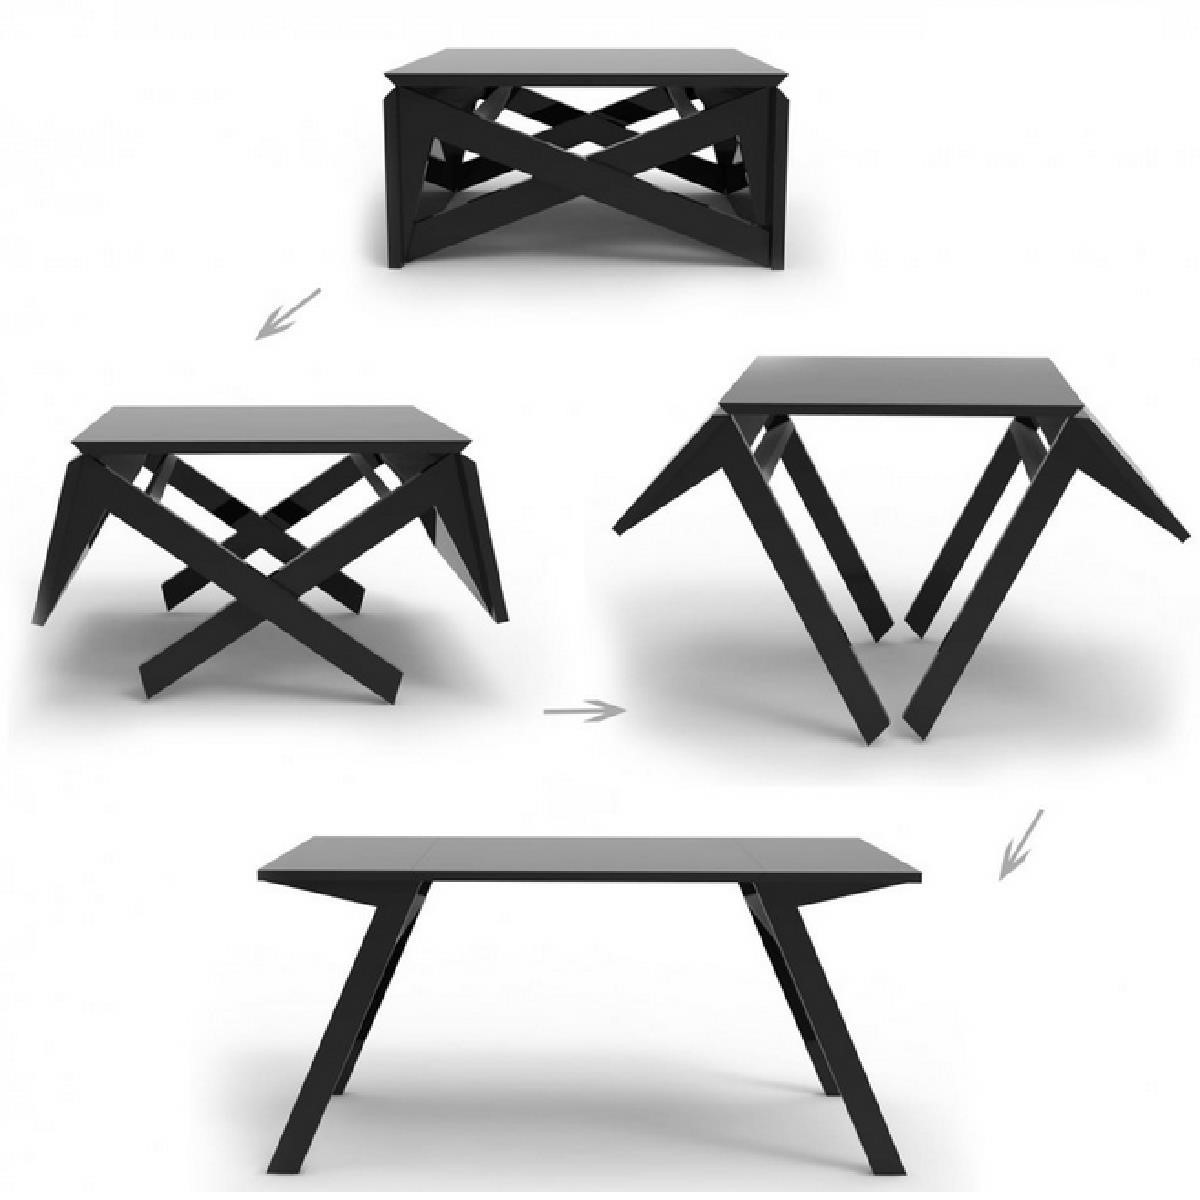 The transforming coffee table genius and its not by ikea